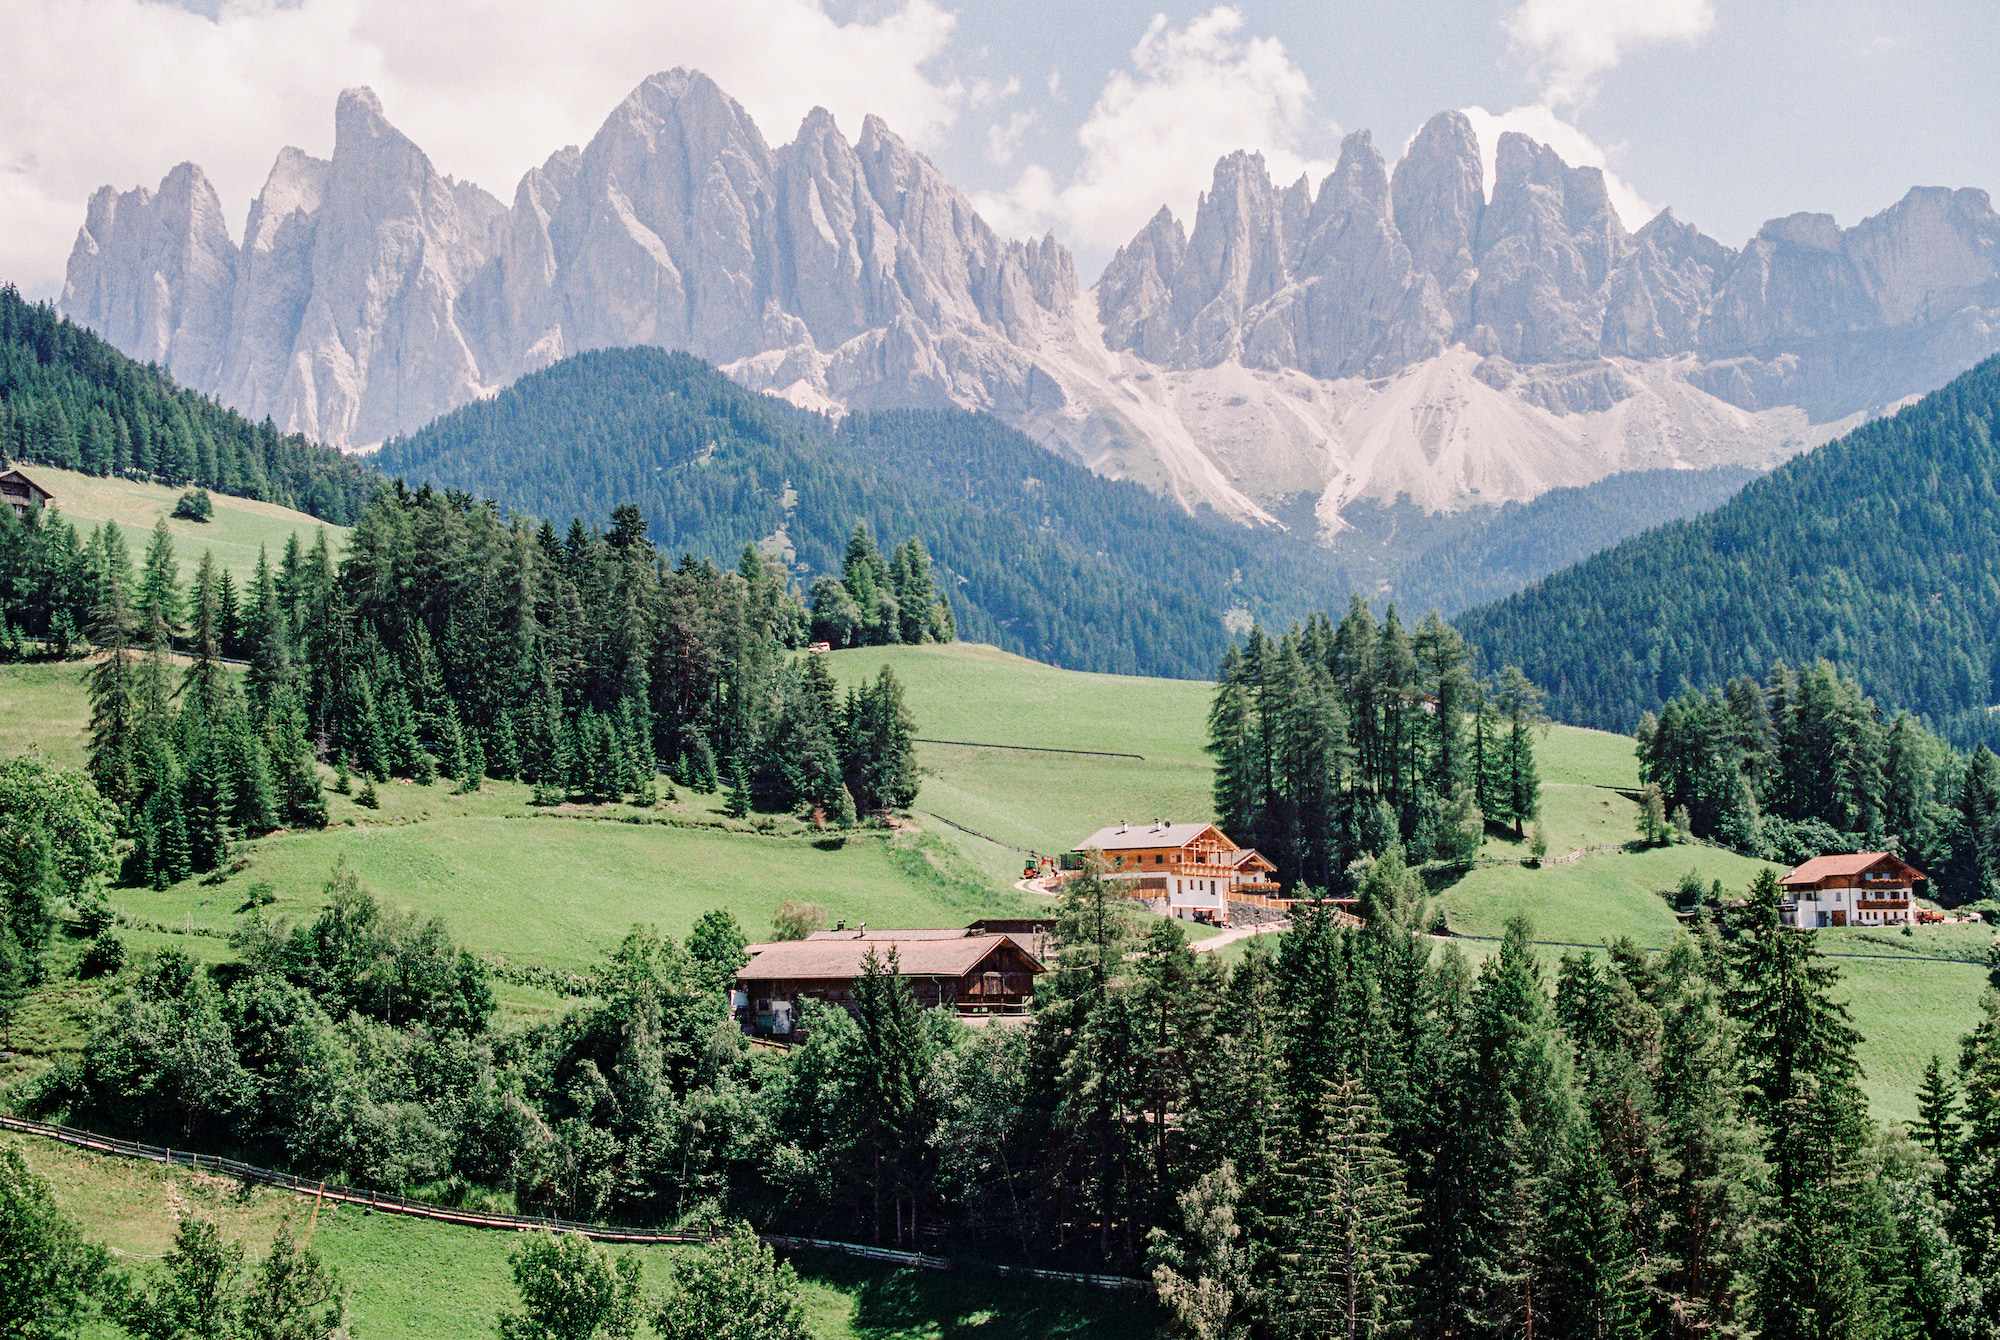 Layers of green hills and jagged stone mountains of the Dolomites in northern Italy.